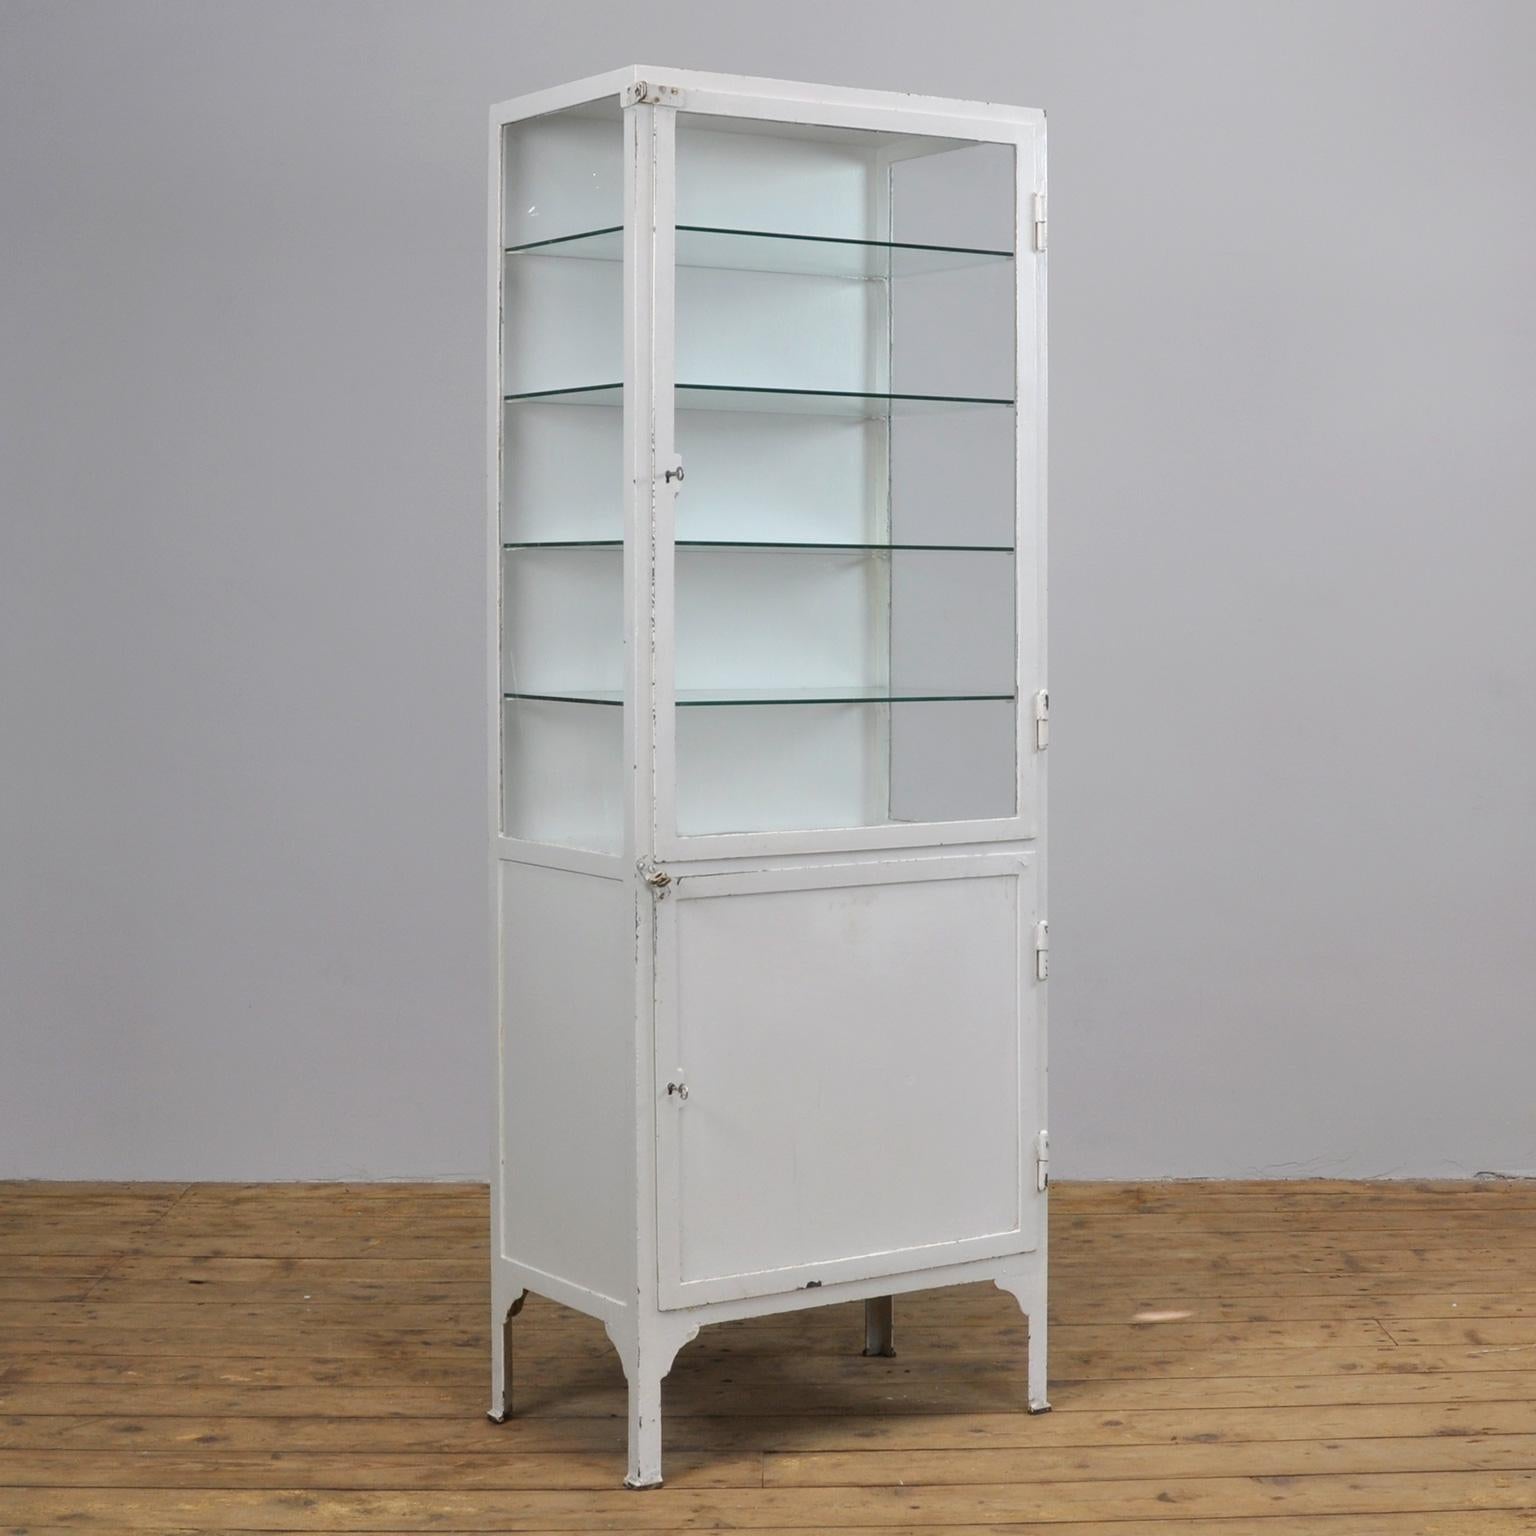 Medical Iron and Glass Cabinet, 1940s (Industriell)